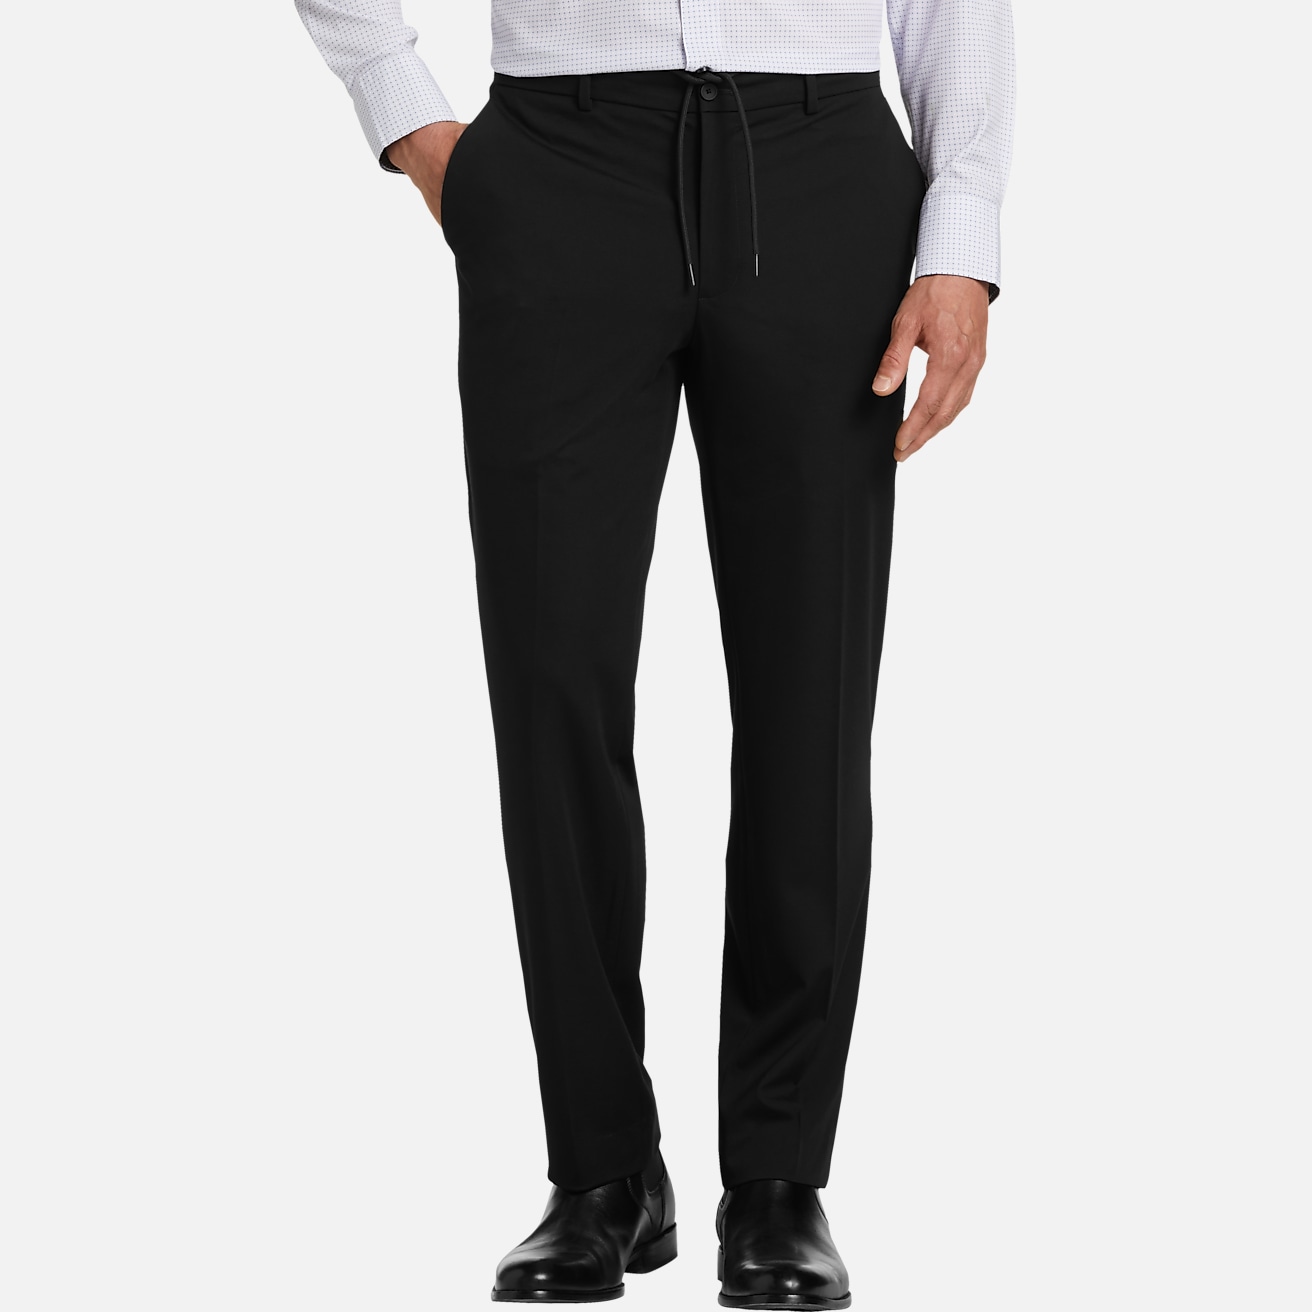 Awearness Kenneth Cole Knit Slim Fit Suit Separates Solid Pants